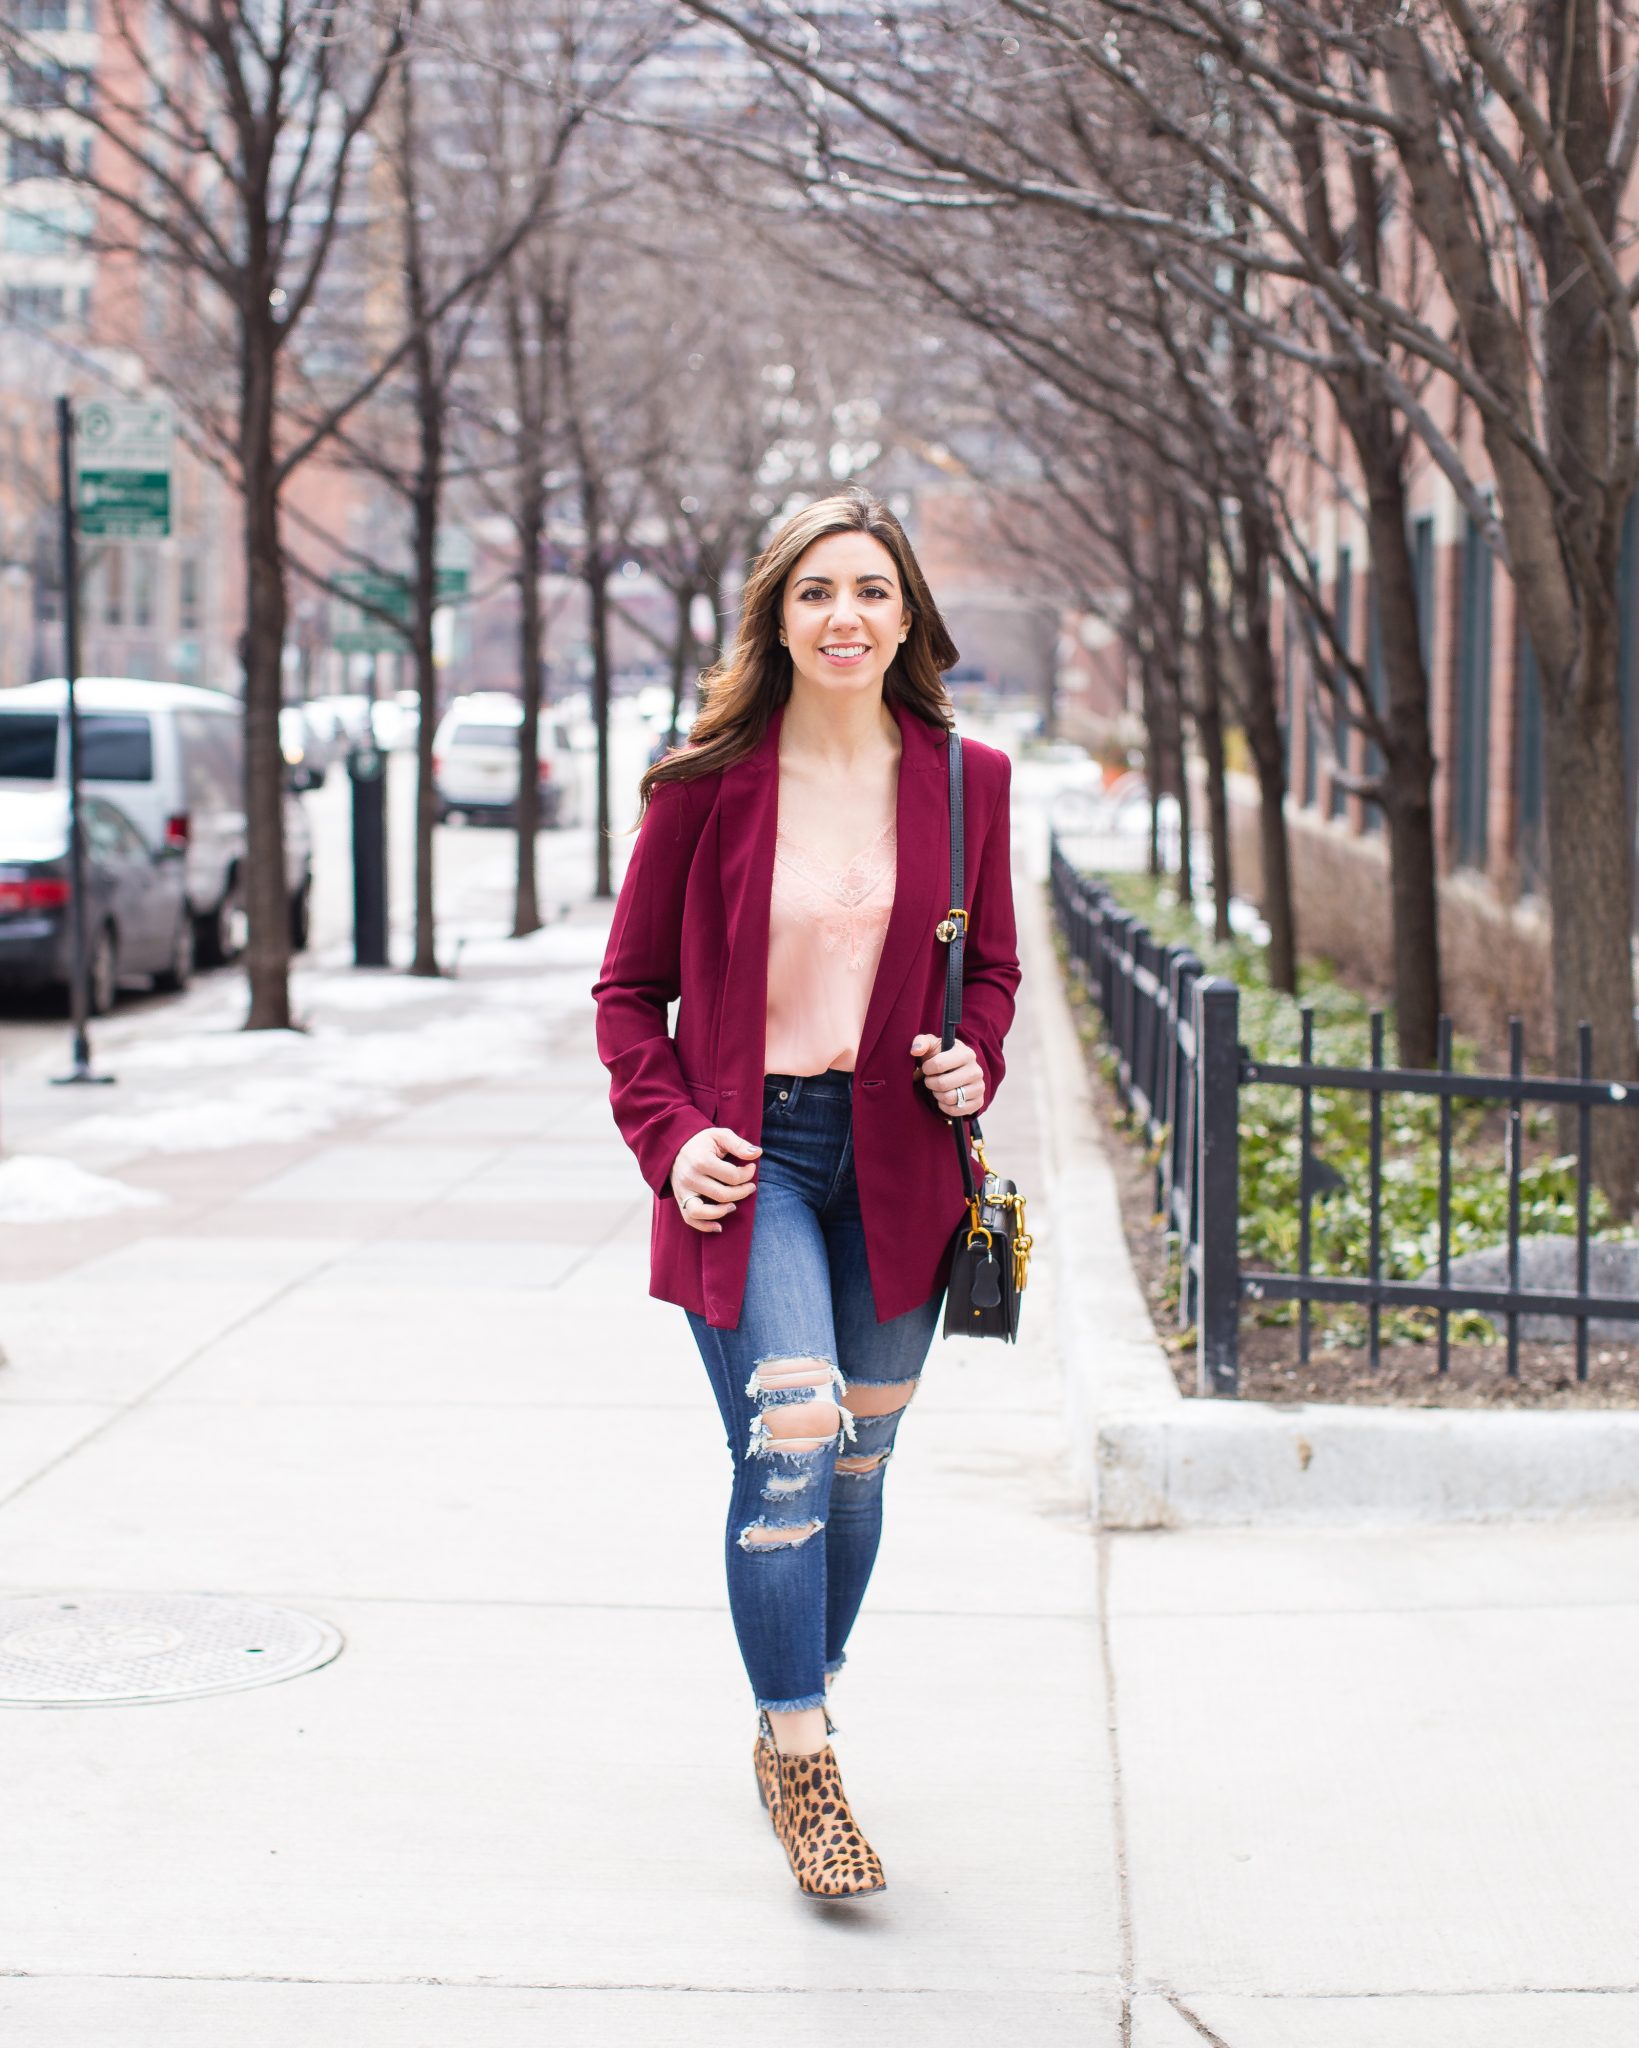 Lifestyle blogger Roxanne of Glass of Glam wearing a burgundy boyfriend blazer, Express denim, leopard booties, lace cami, and a Chloe Nile bag dupe - Nordstrom Burgundy Blazer  by popular Chicago fashion blogger Glass of Glam